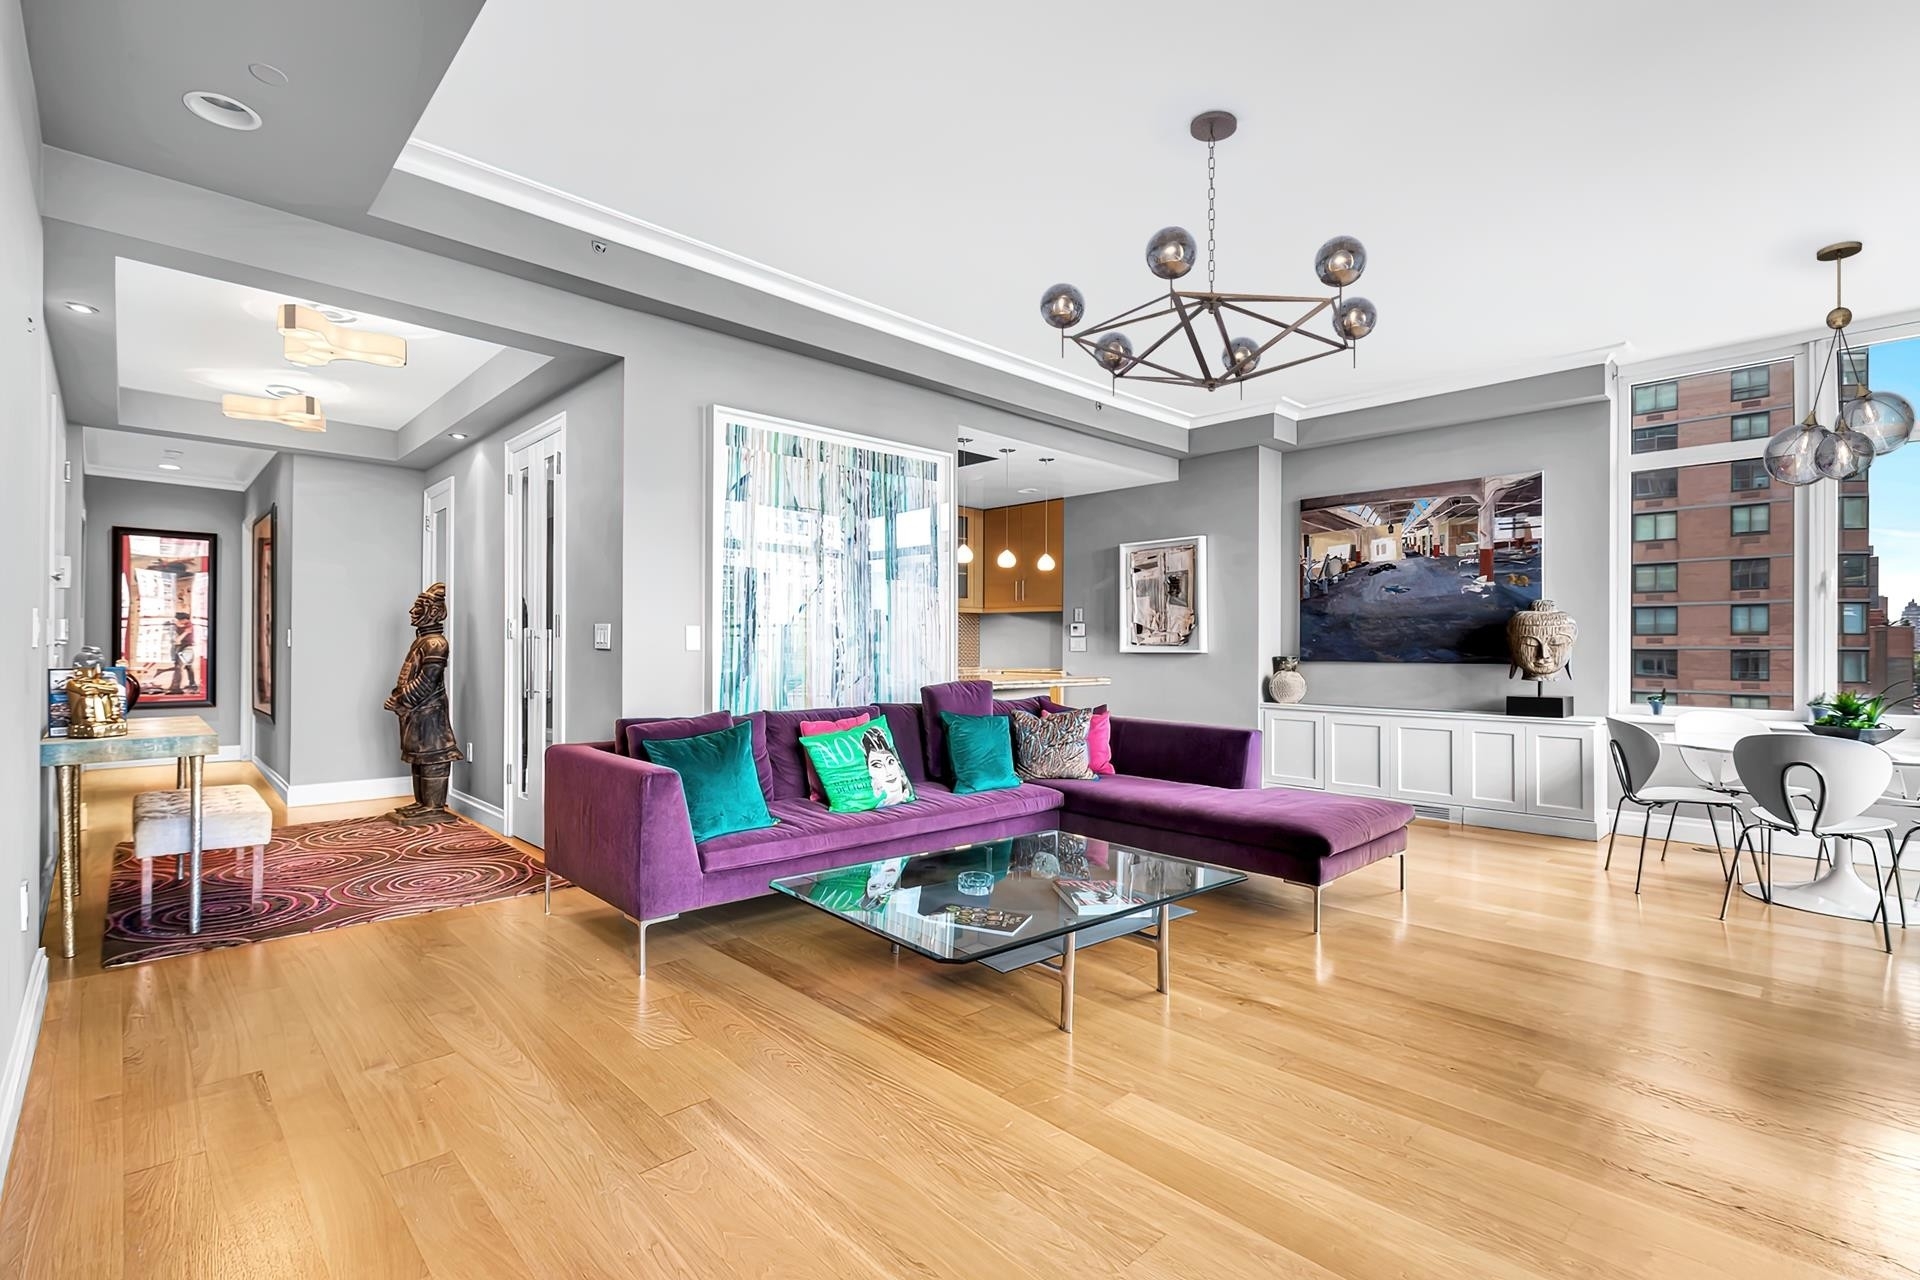 Condominium for Sale at Arcadia, 408 E 79TH ST, 16A Upper East Side, New York, NY 10075